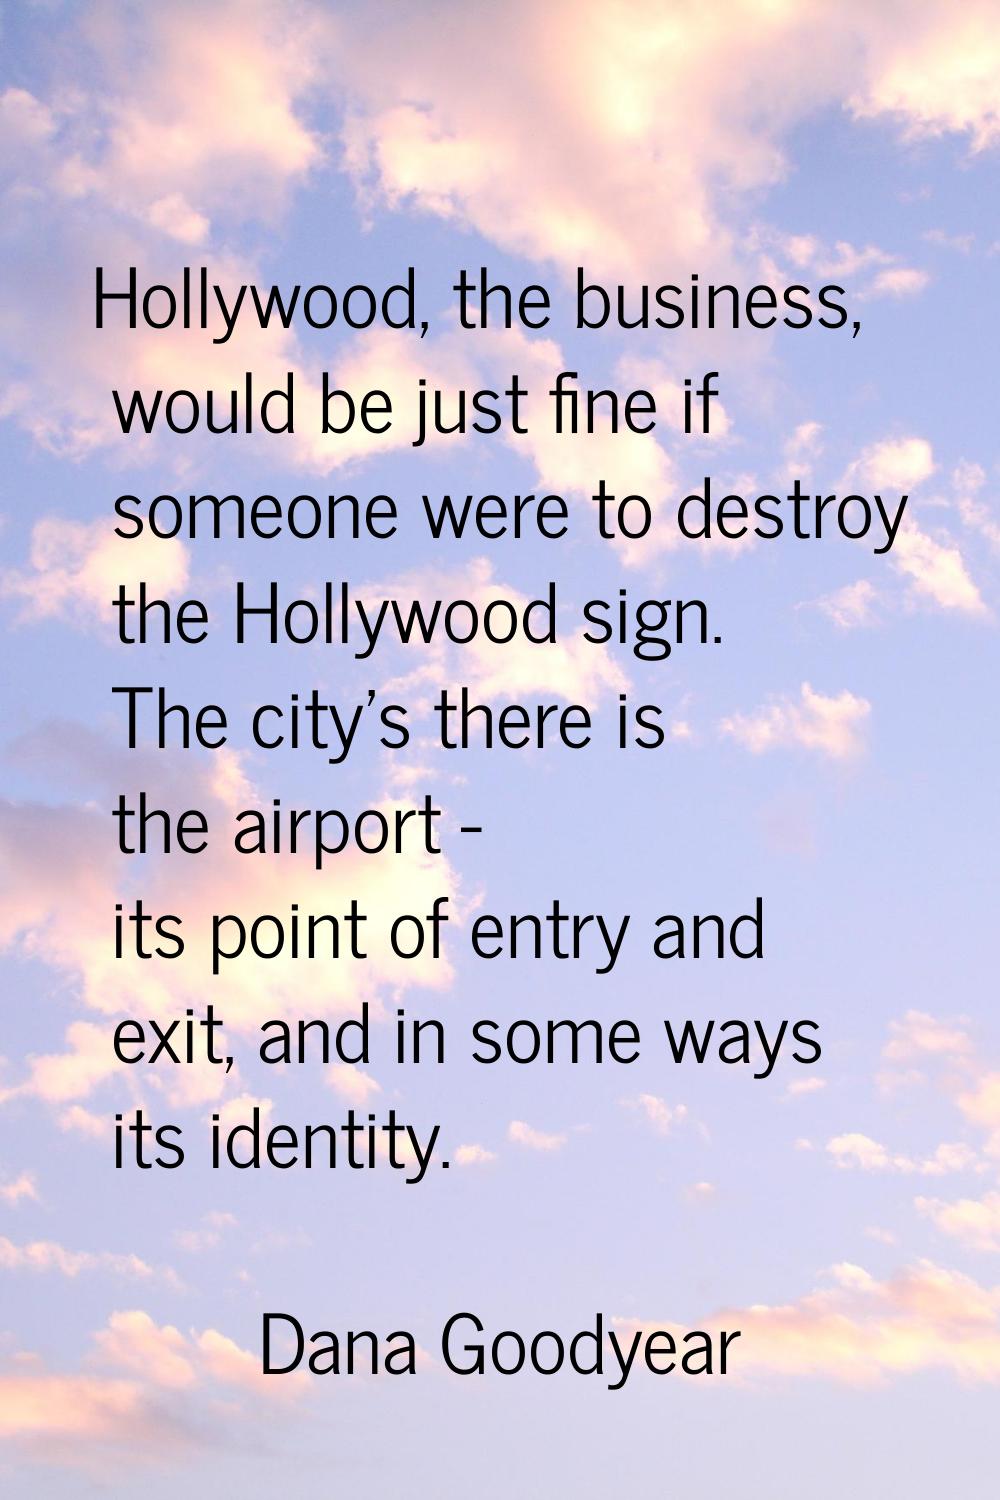 Hollywood, the business, would be just fine if someone were to destroy the Hollywood sign. The city